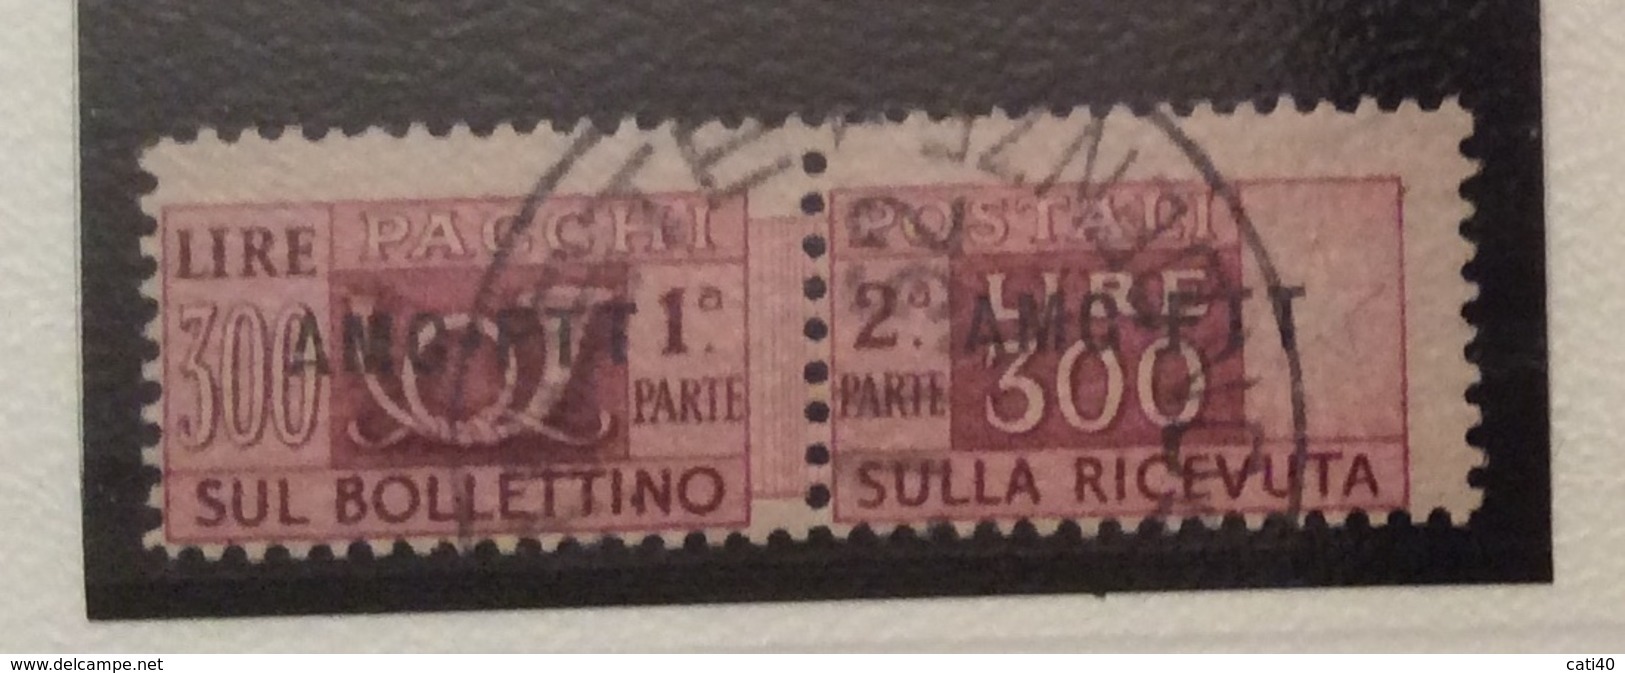 TRIESTE AMGFTT PACCHI POSTALI L. 300 RUOTA USATO - Postal And Consigned Parcels